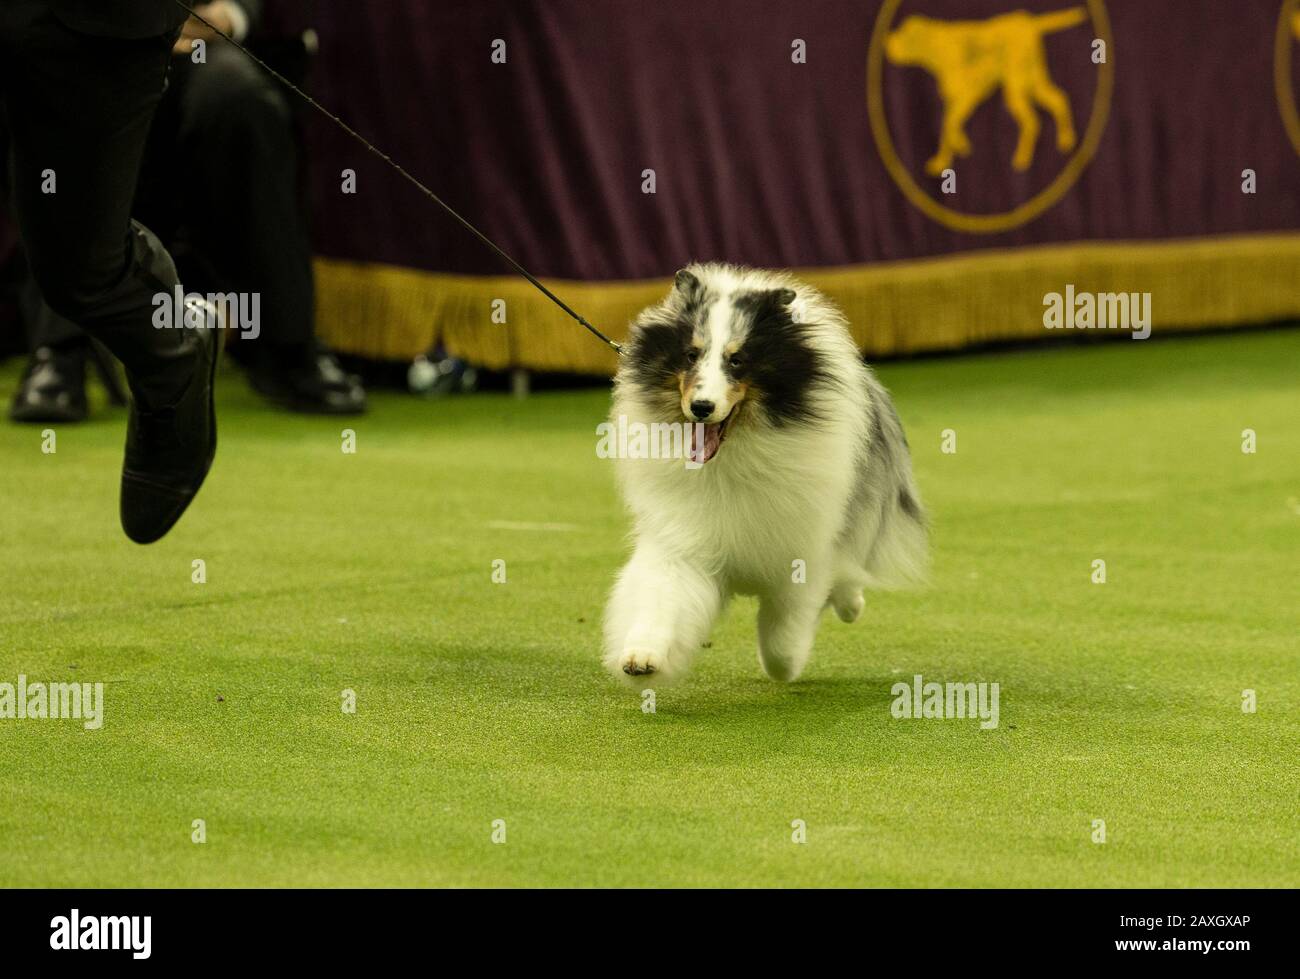 New York, NY - February 11, 2020: Winner of Herding Group Shetland Sheepdog named Conrad runs during 144th Westminster Kennel Club Dog Show at Madison Square Garden Stock Photo